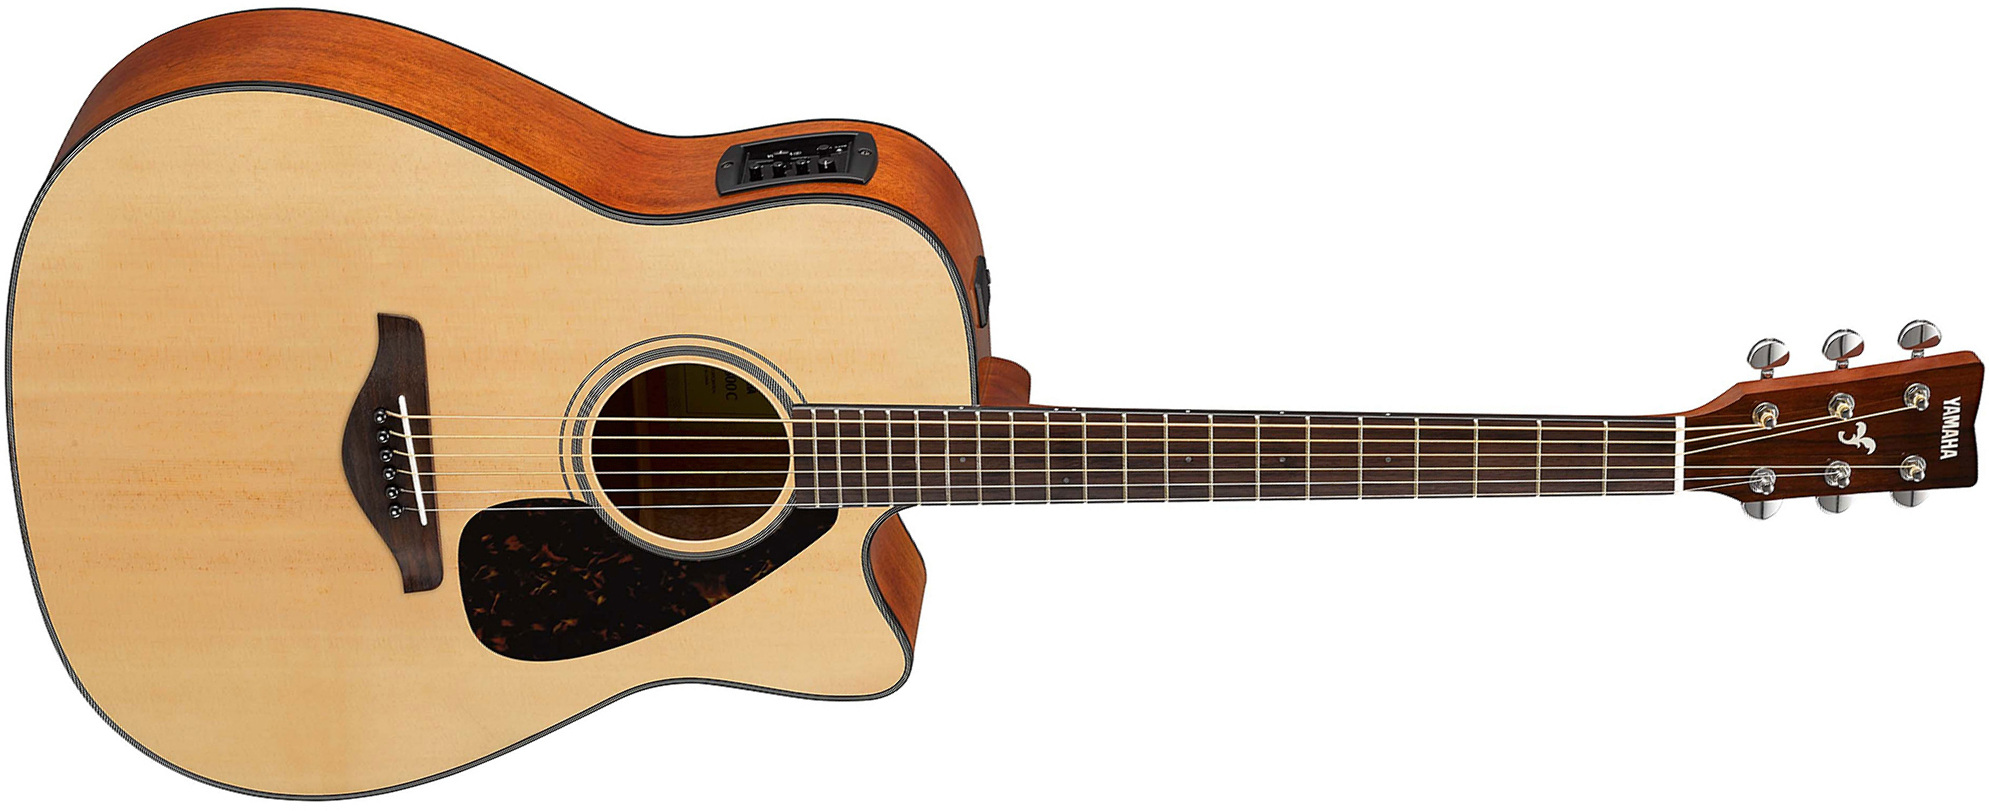 Yamaha Fgx800c Nt Dreadnought Cw Epicea Nato 2016 - Natural - Electro acoustic guitar - Main picture